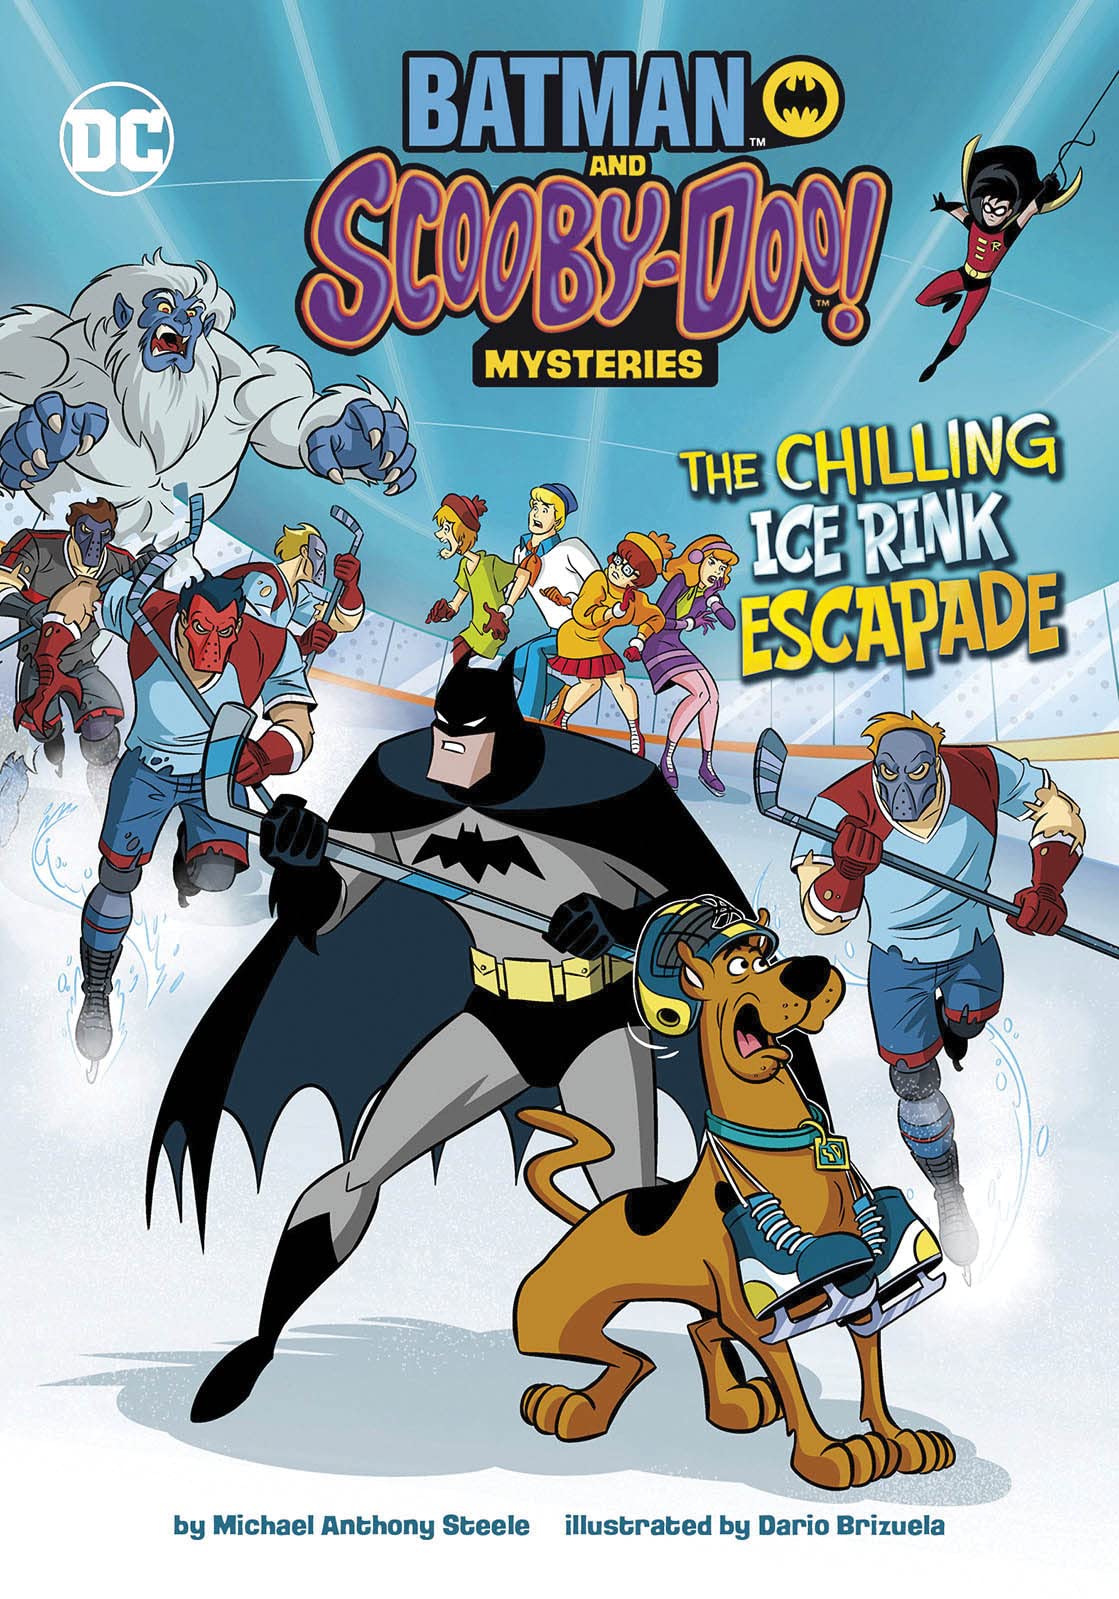 Batman and Scooby-Doo! Mysteries: Chilling Ice Rink Escapade TP - Third Eye